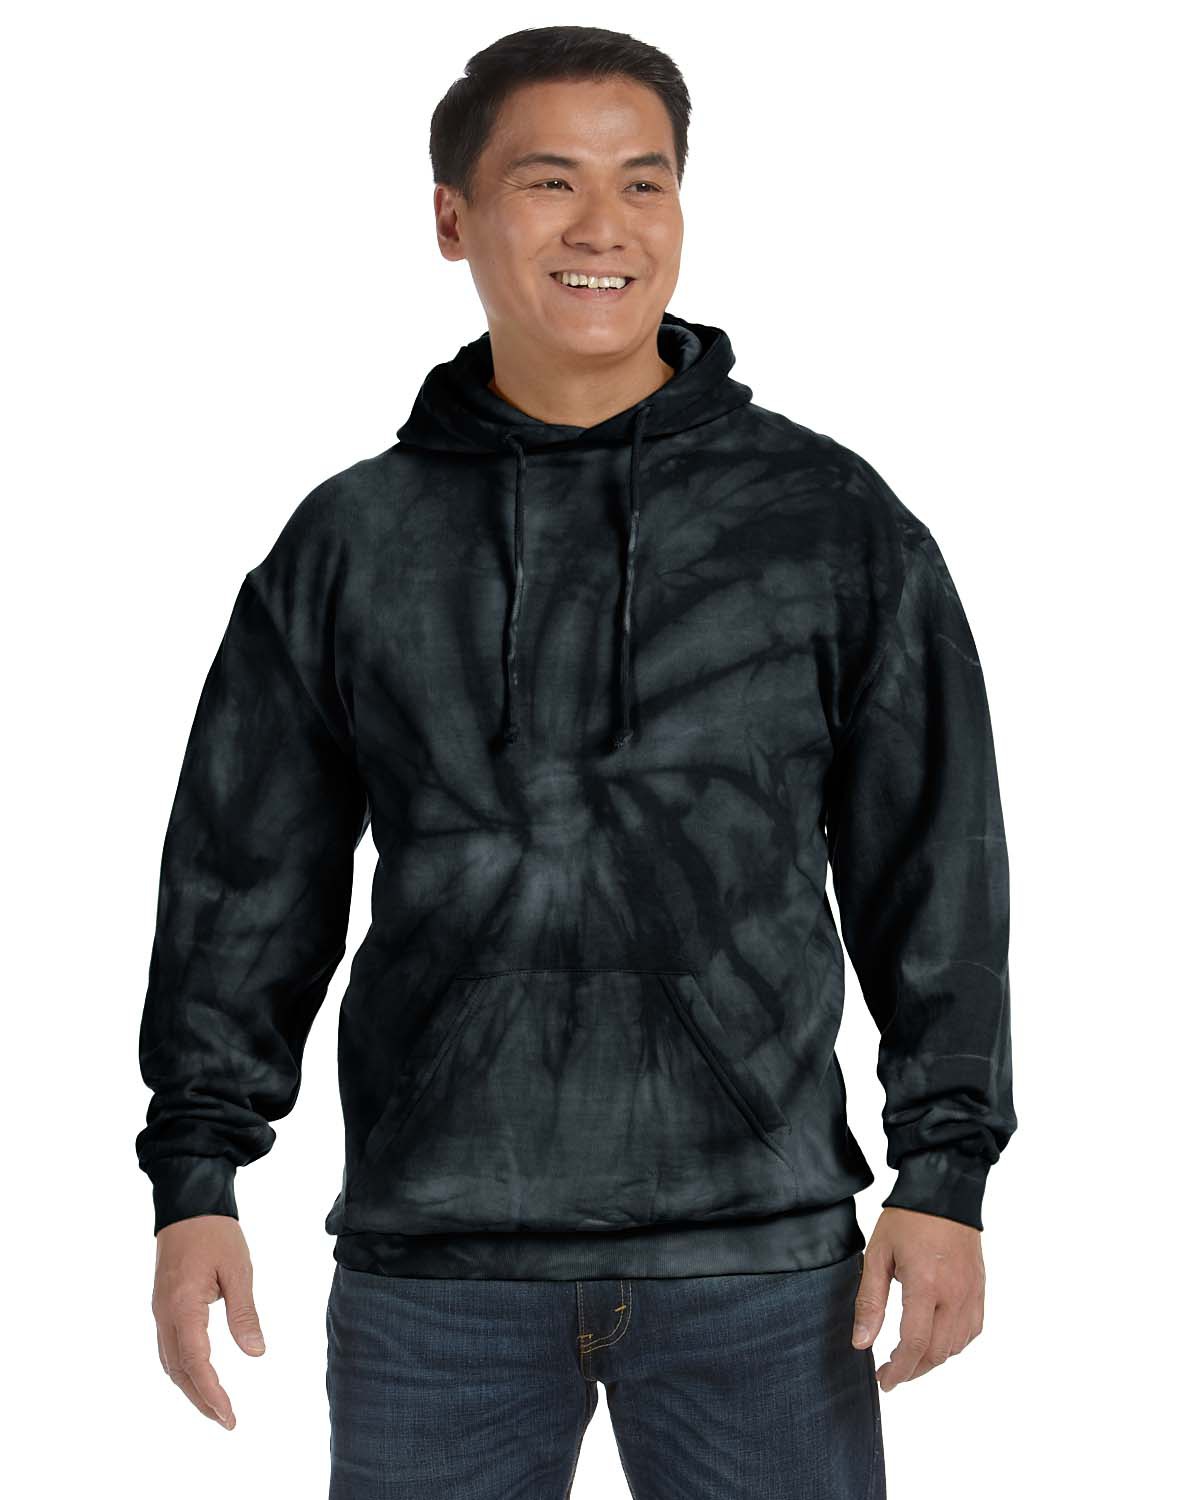 Tie-Dye CD877 | Adult 8.5 Tie-Dyed Pullover Hood ShirtSpace